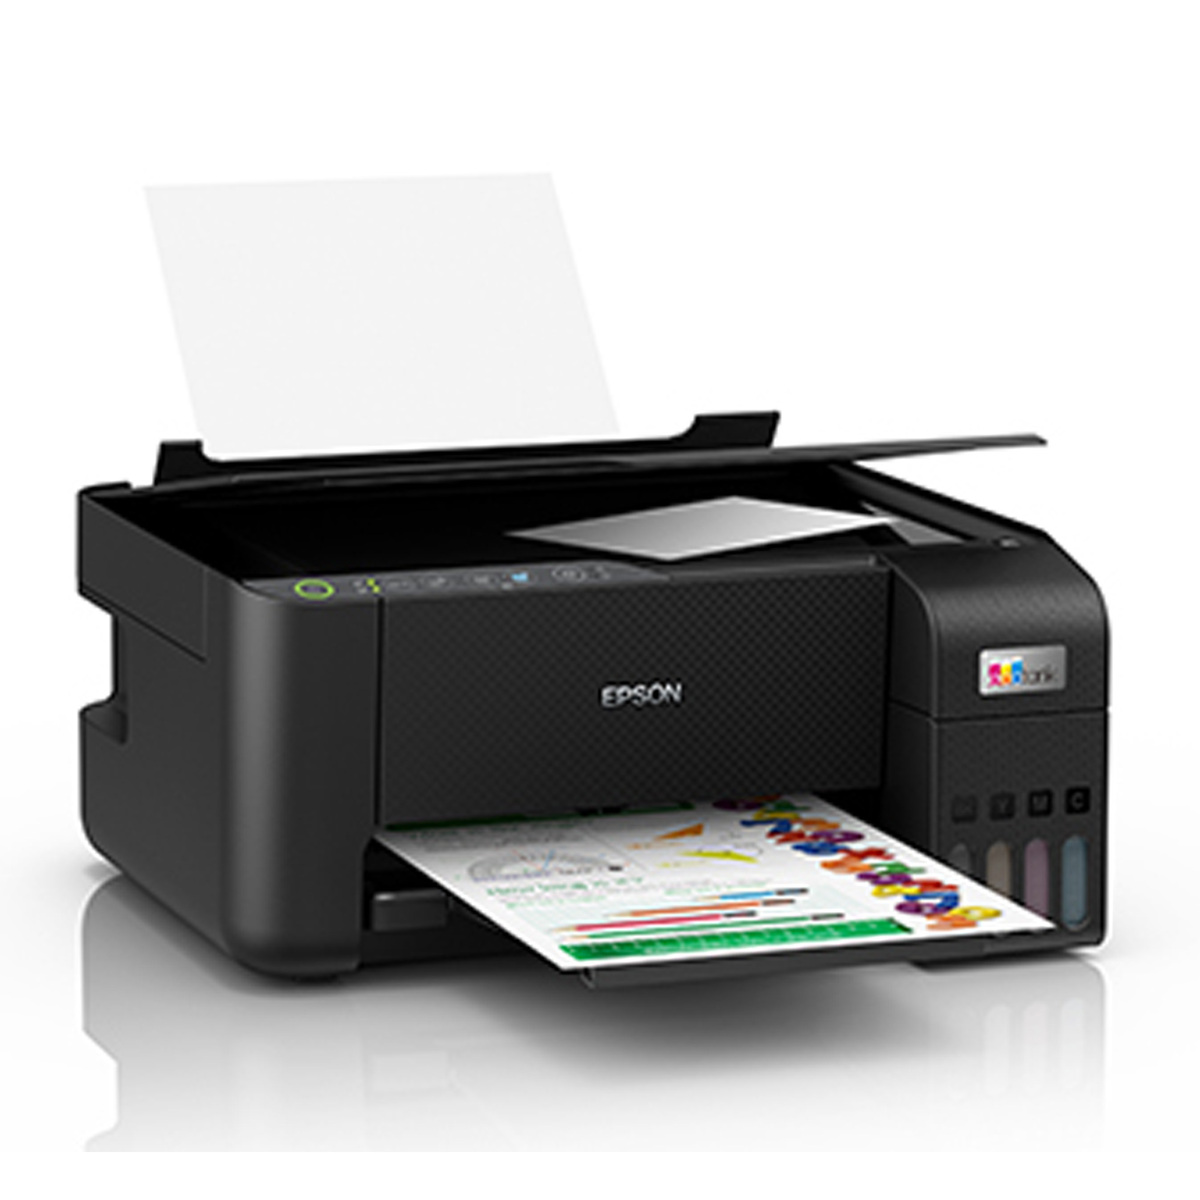 Epson EcoTank L3252 A4 Wi-Fi All-in-One Ink Tank Printer